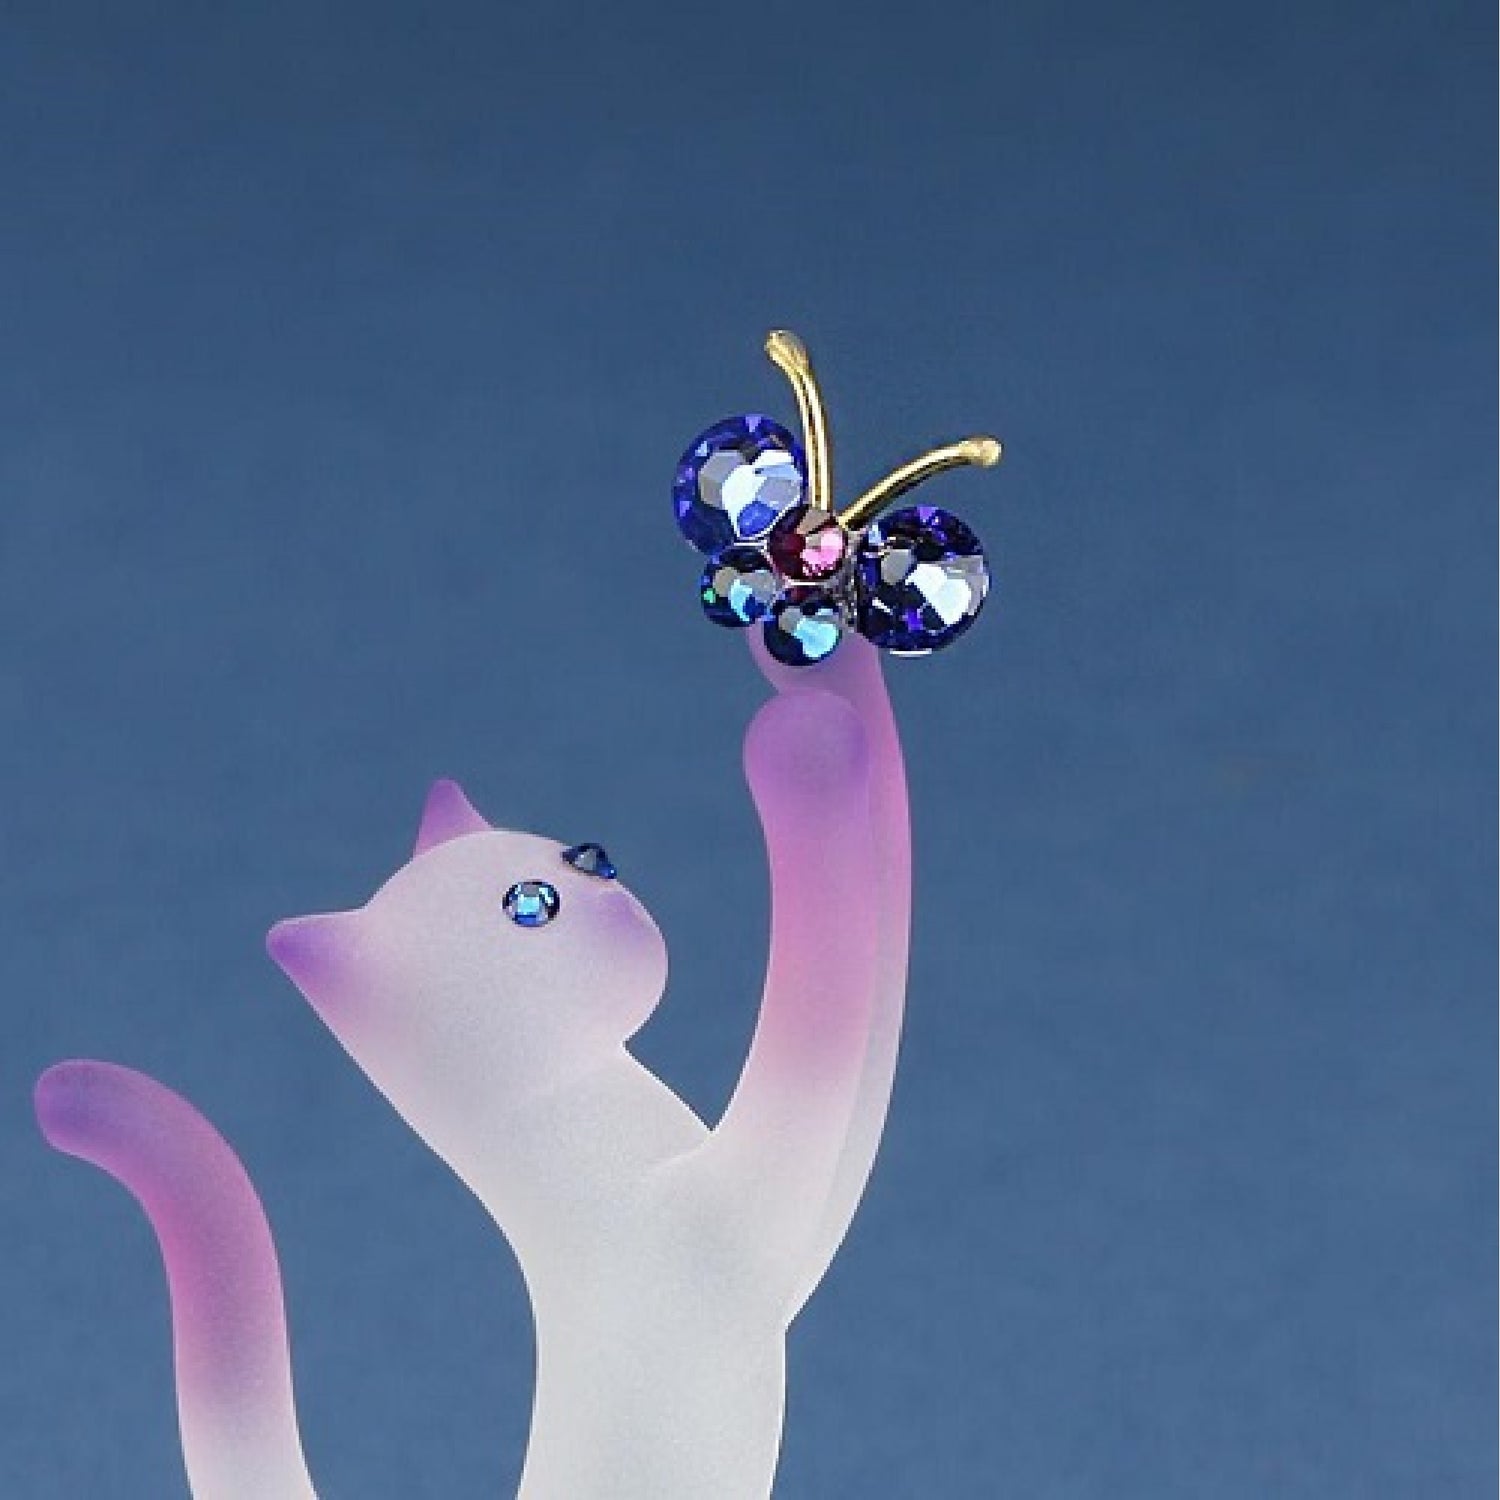 Glass Baron Princess Cat with Butterfly Figurine